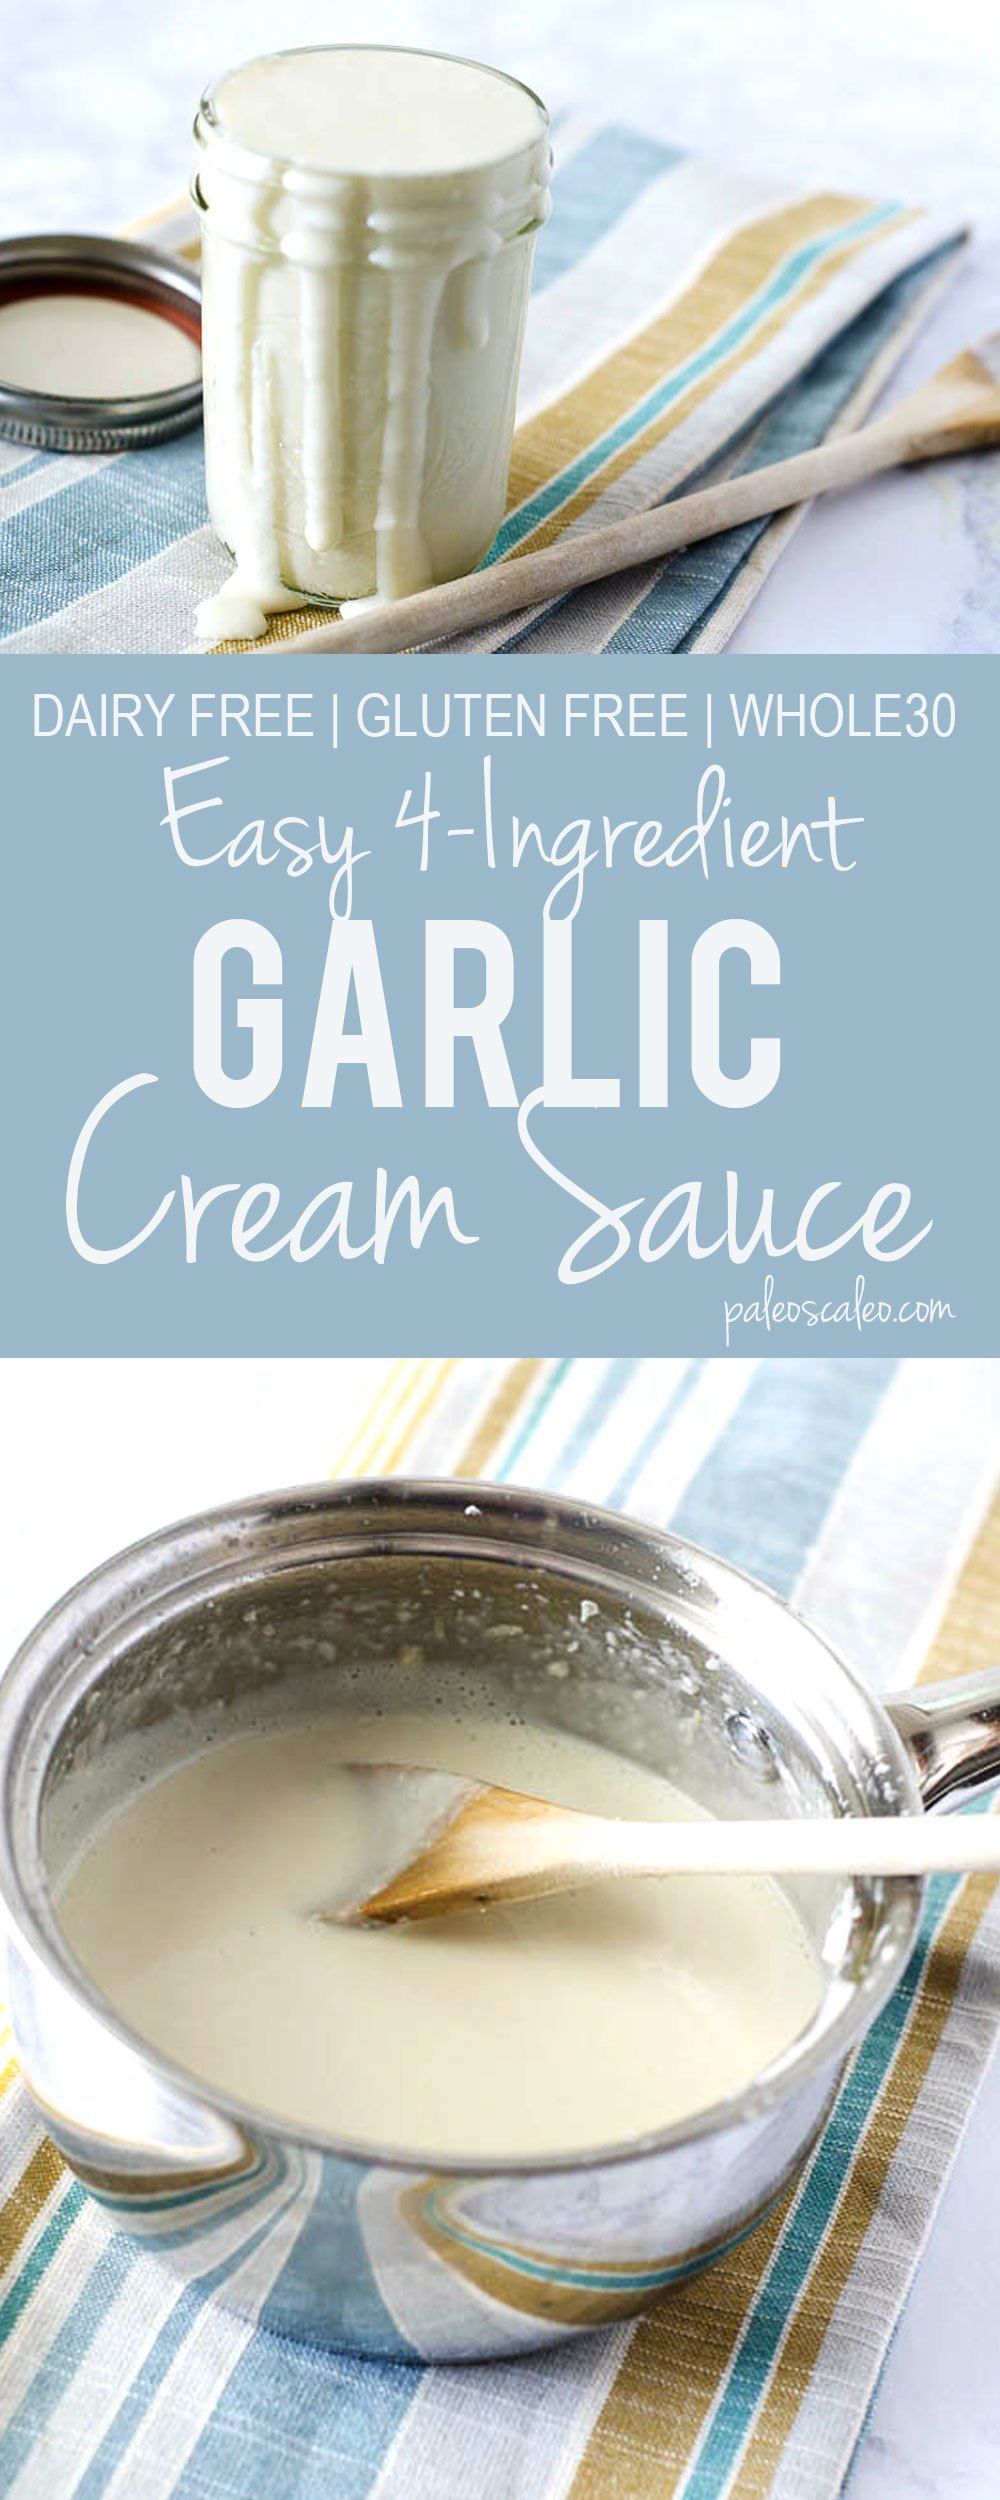 This Garlic Cream Sauce has only 4 ingredients and takes just minutes to make!  | PaleoScaleo.com